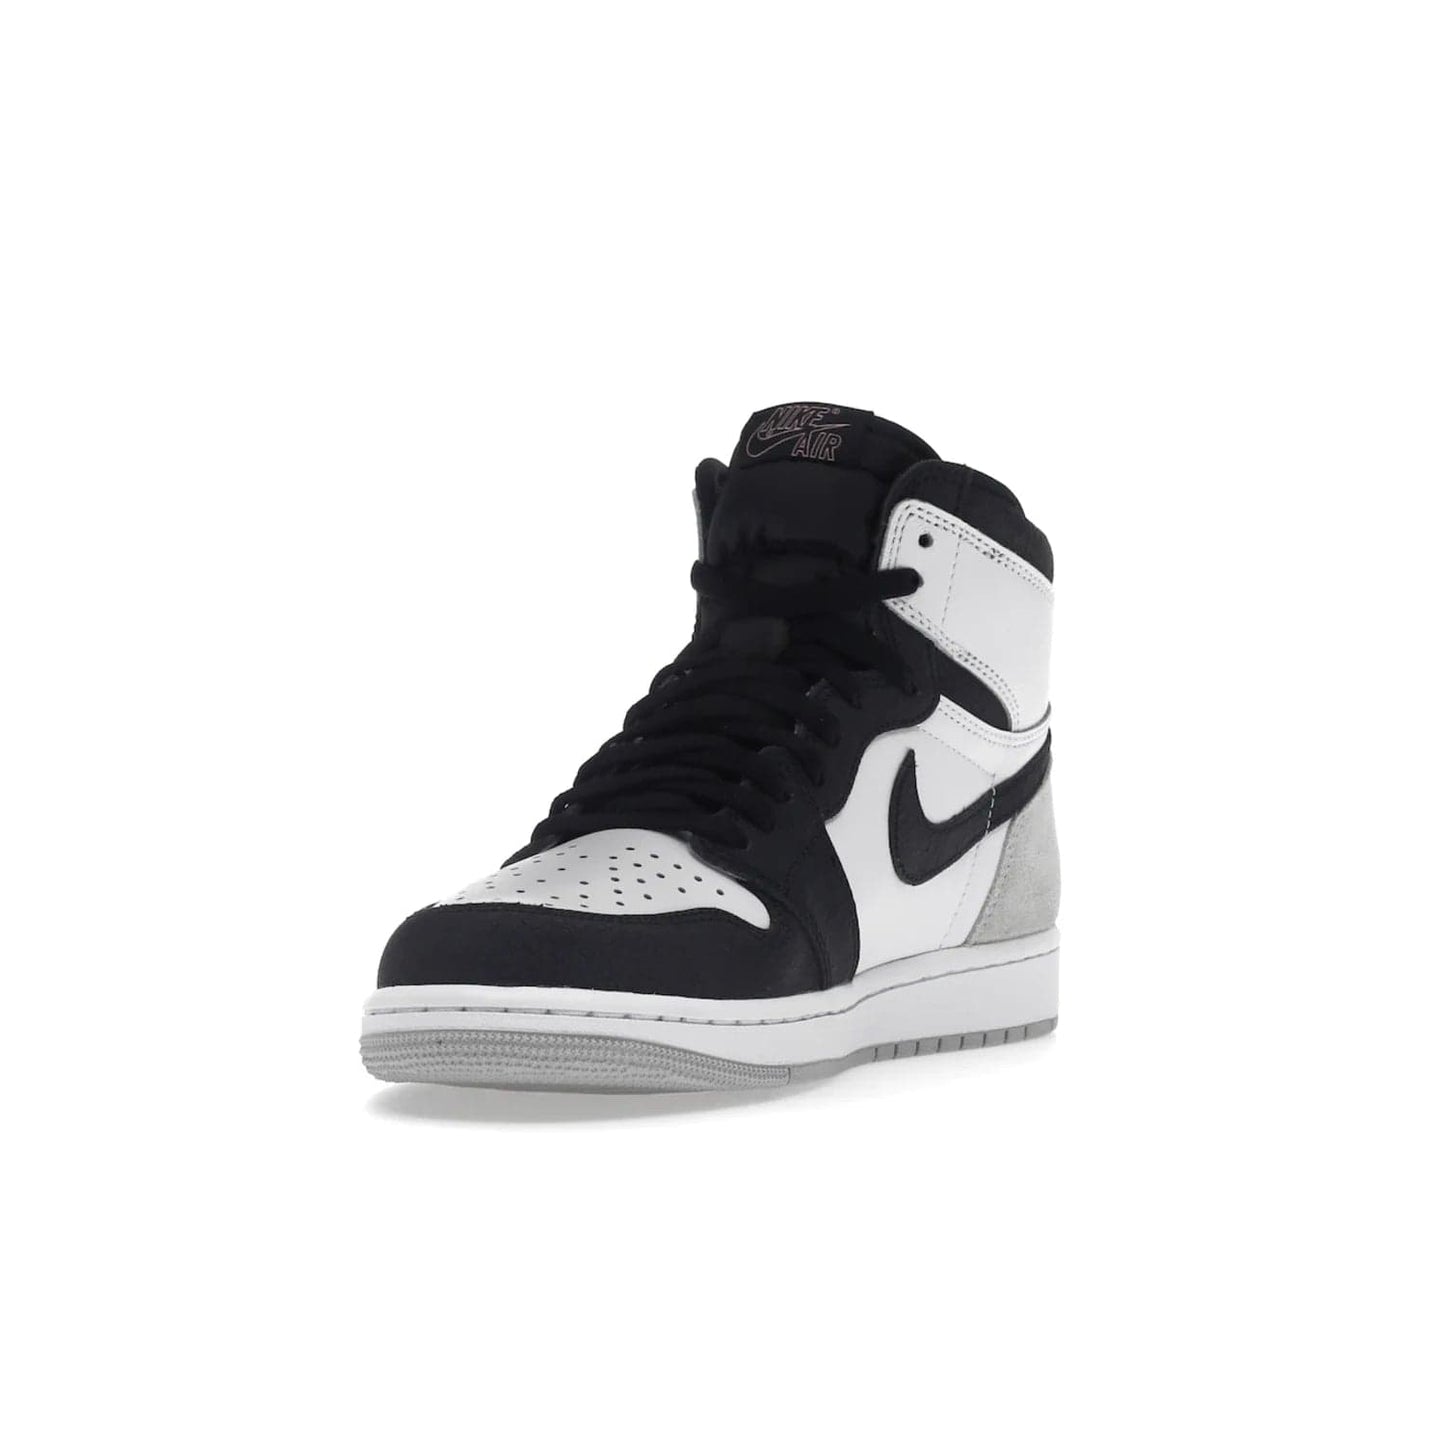 Jordan 1 Retro High OG Bleached Coral - Image 13 - Only at www.BallersClubKickz.com - Check out the latest AJ1 High OG Bleached Coral release, featuring white and black leather with grey overlays and a classic Nike Air cushioning. Shop now!